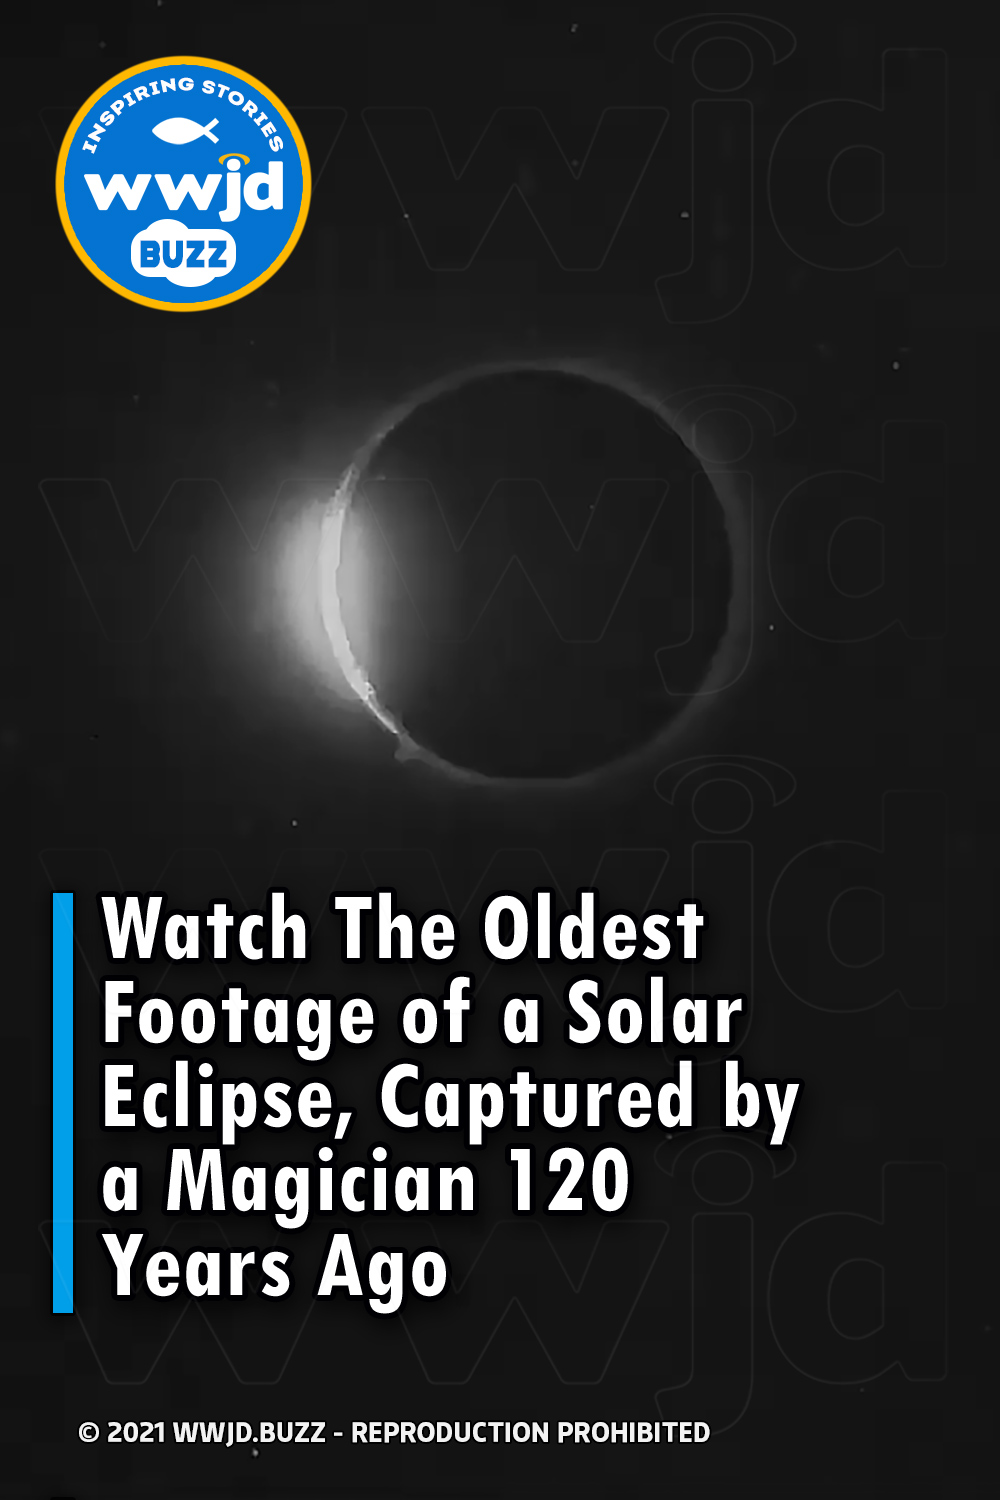 Watch The Oldest Footage of a Solar Eclipse, Captured by a Magician 120 Years Ago